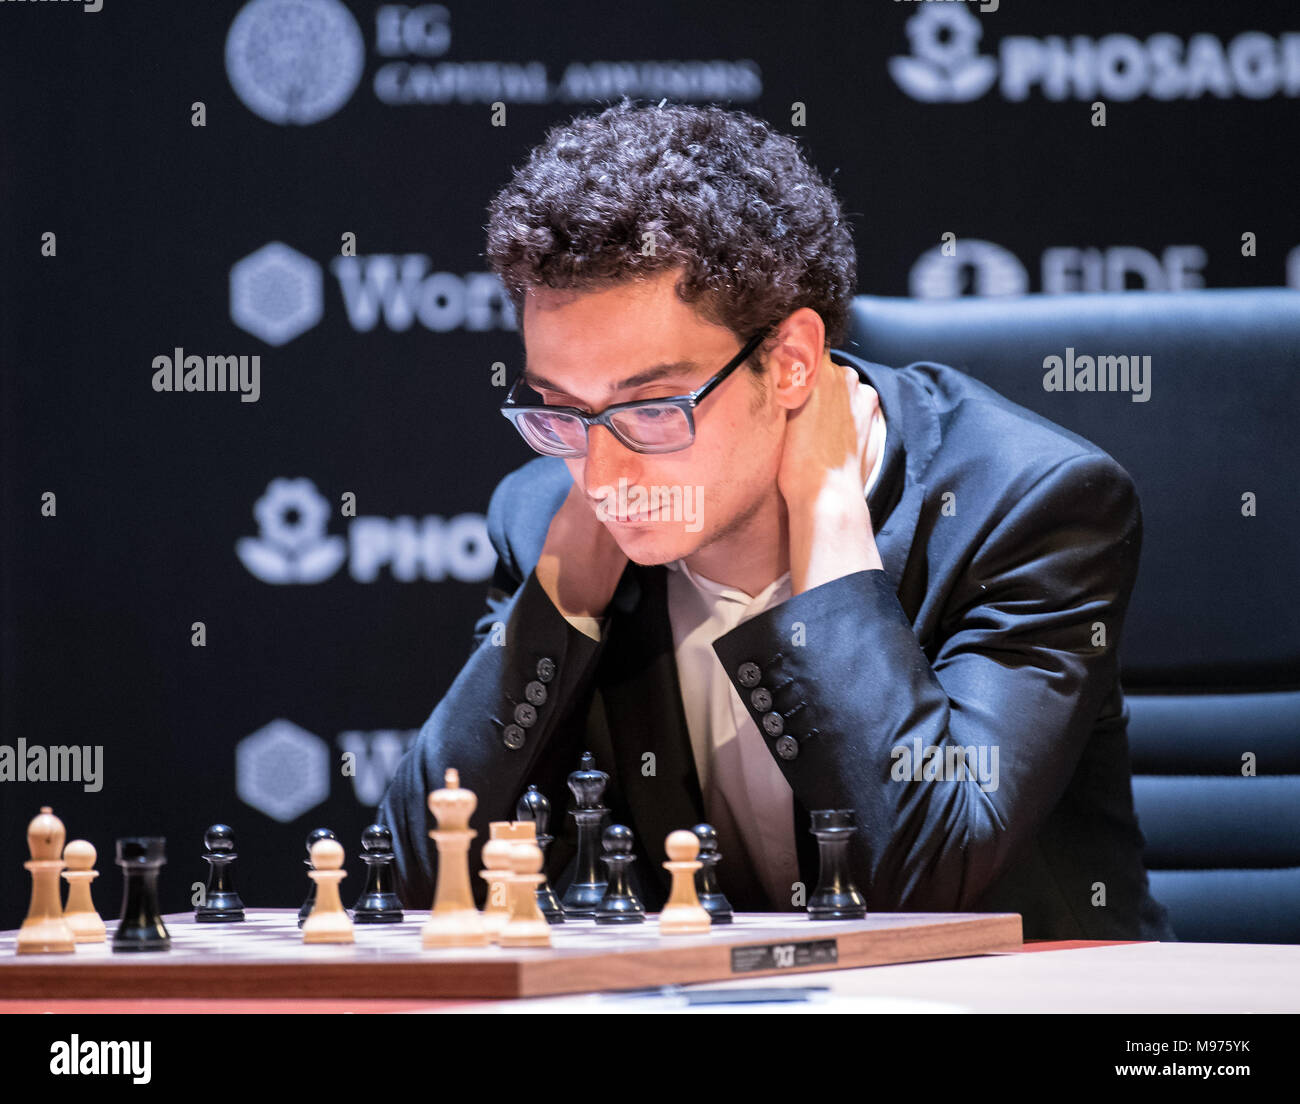 22 March 2018, Germany, Berlin: Italian-American chess champion Fabiano  Caruana competes against Shakhriyar Mamedyarov (not shown), a chess  champion from Azerbaijan, at this year's FIDE World Chess Candidates  Tournament at the Kuehlhaus